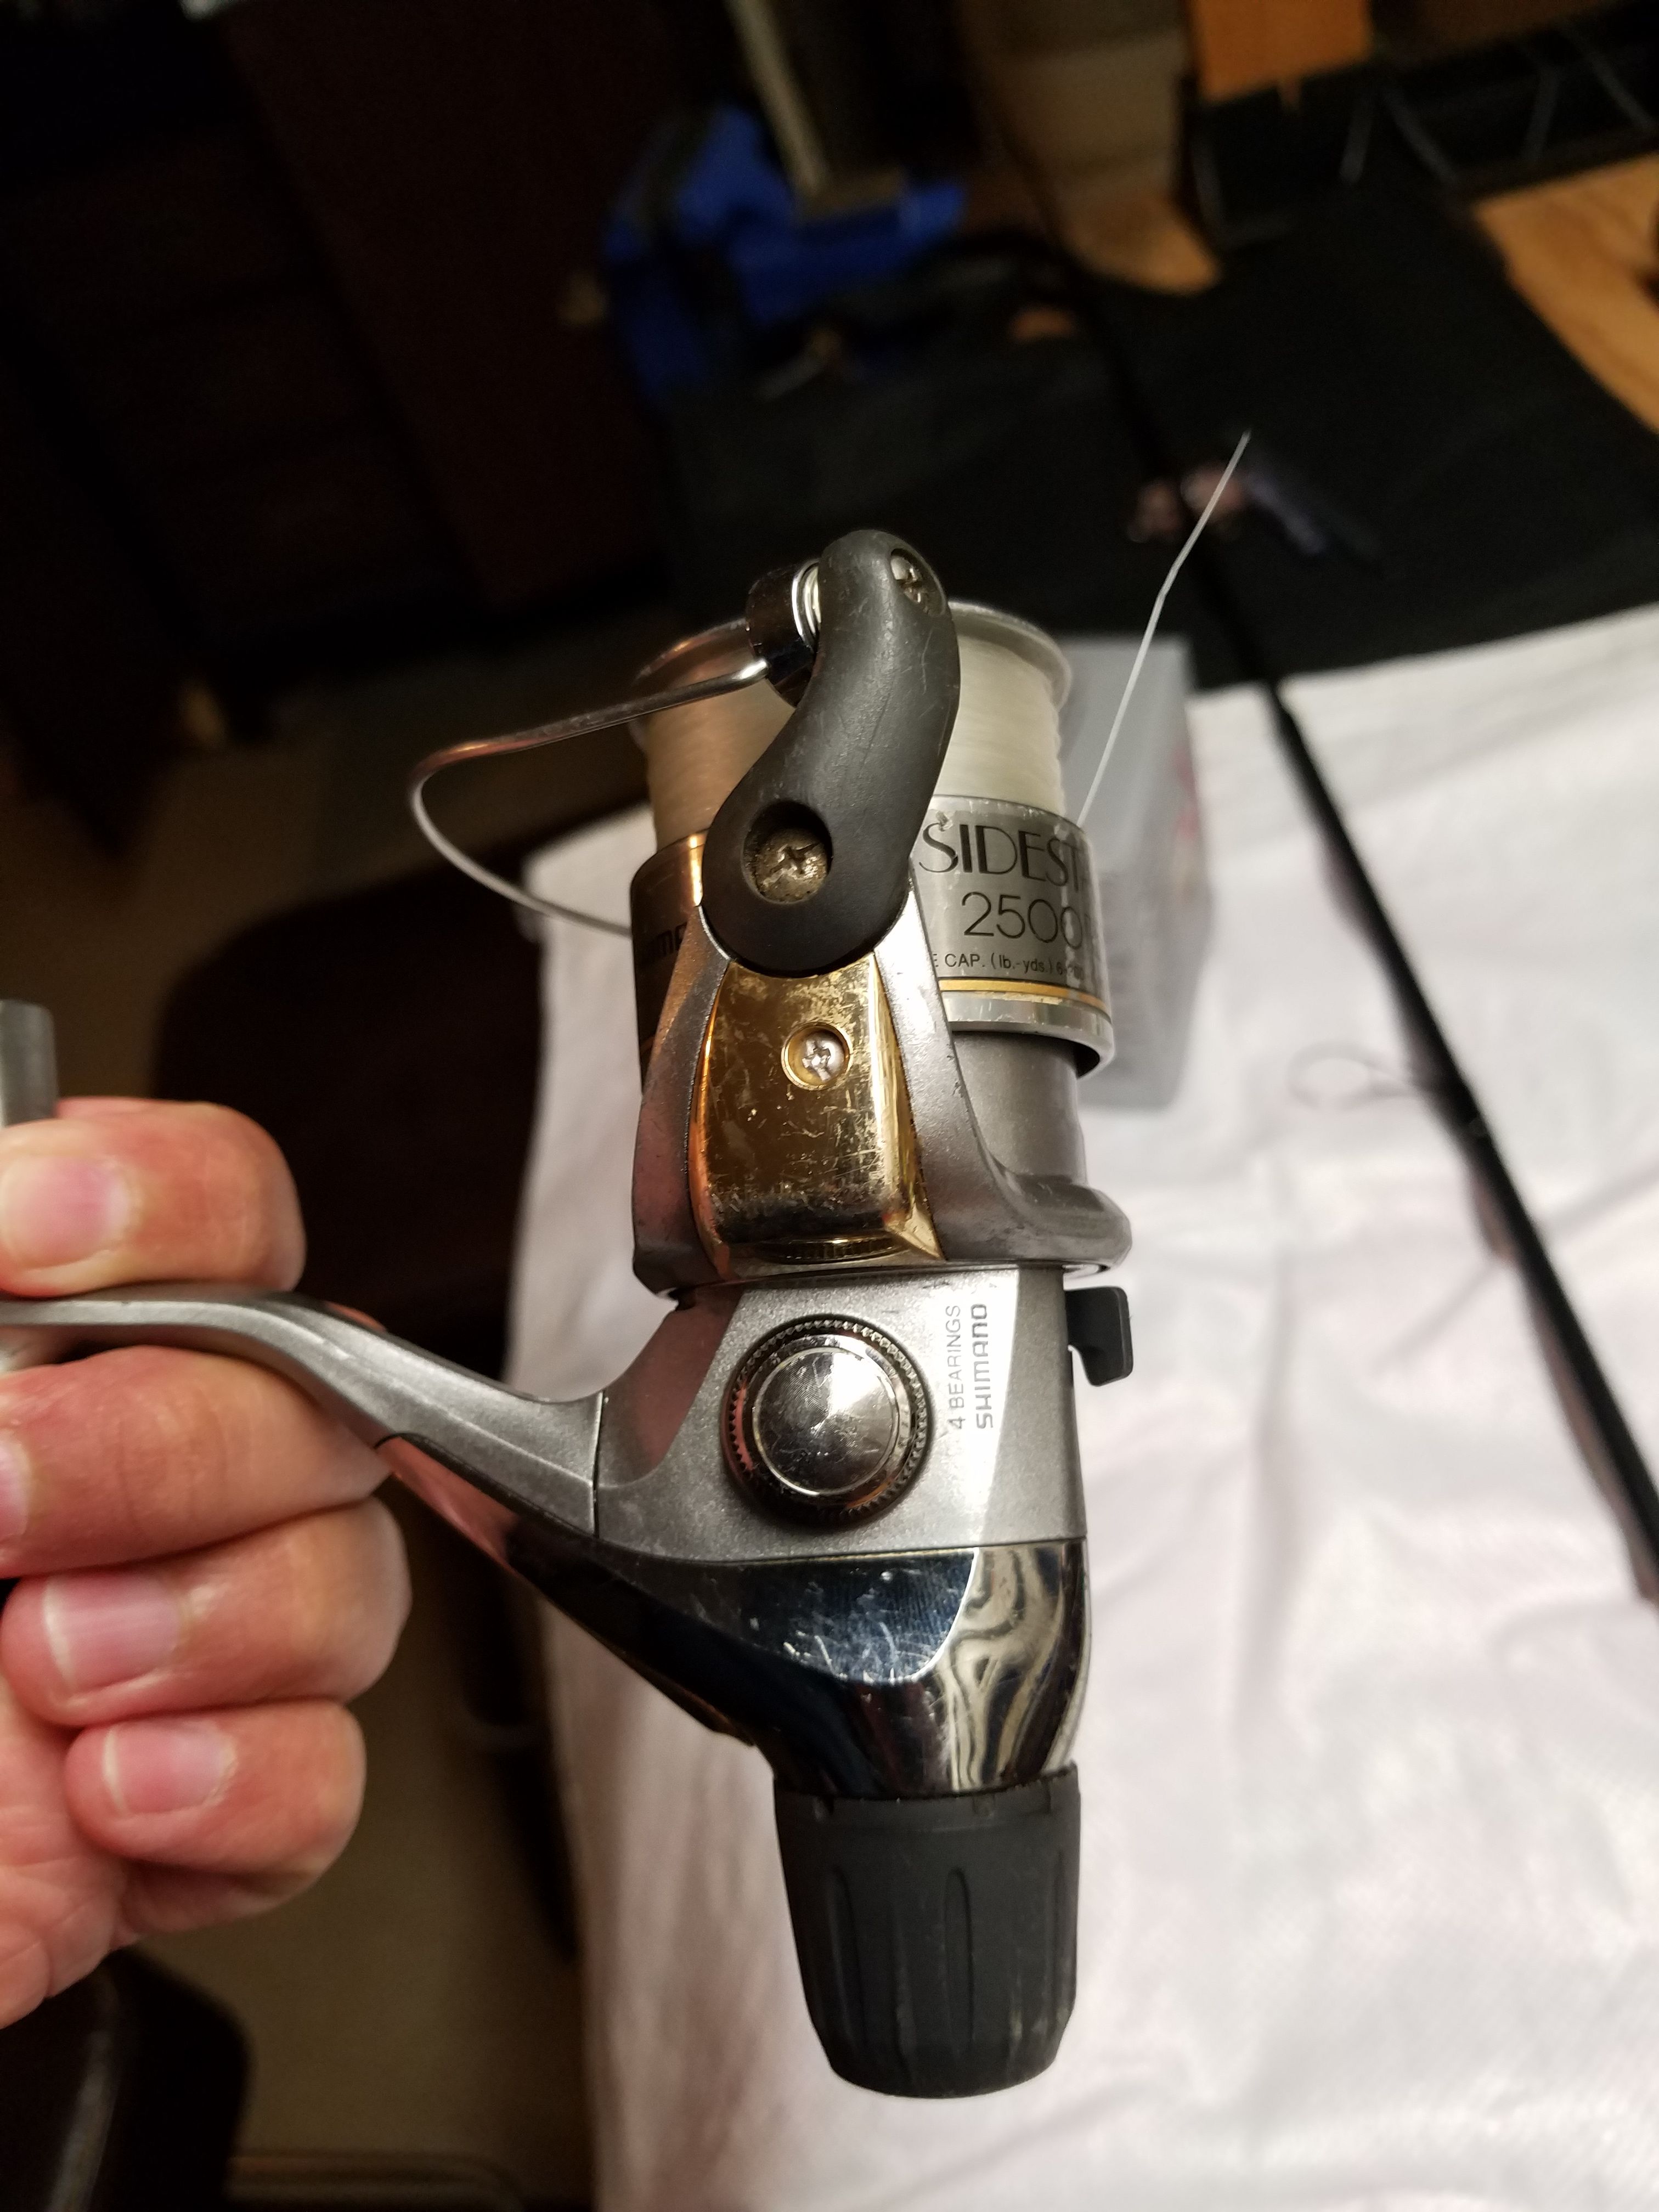 Shimano sidestab 2500 RE for Sale in Porterville, CA - OfferUp